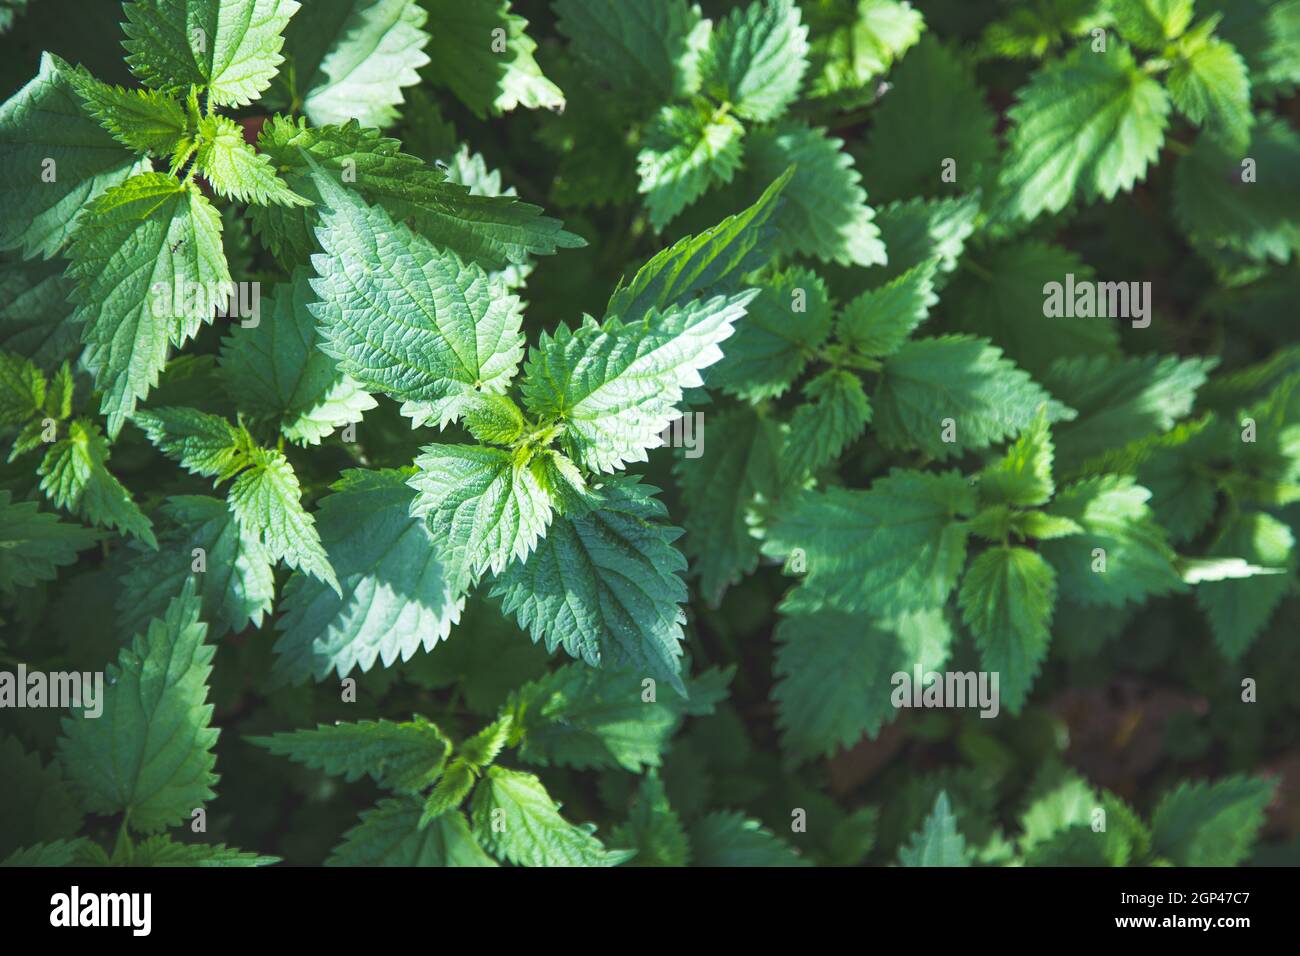 Stinging green nettle leaves background texture Stock Photo